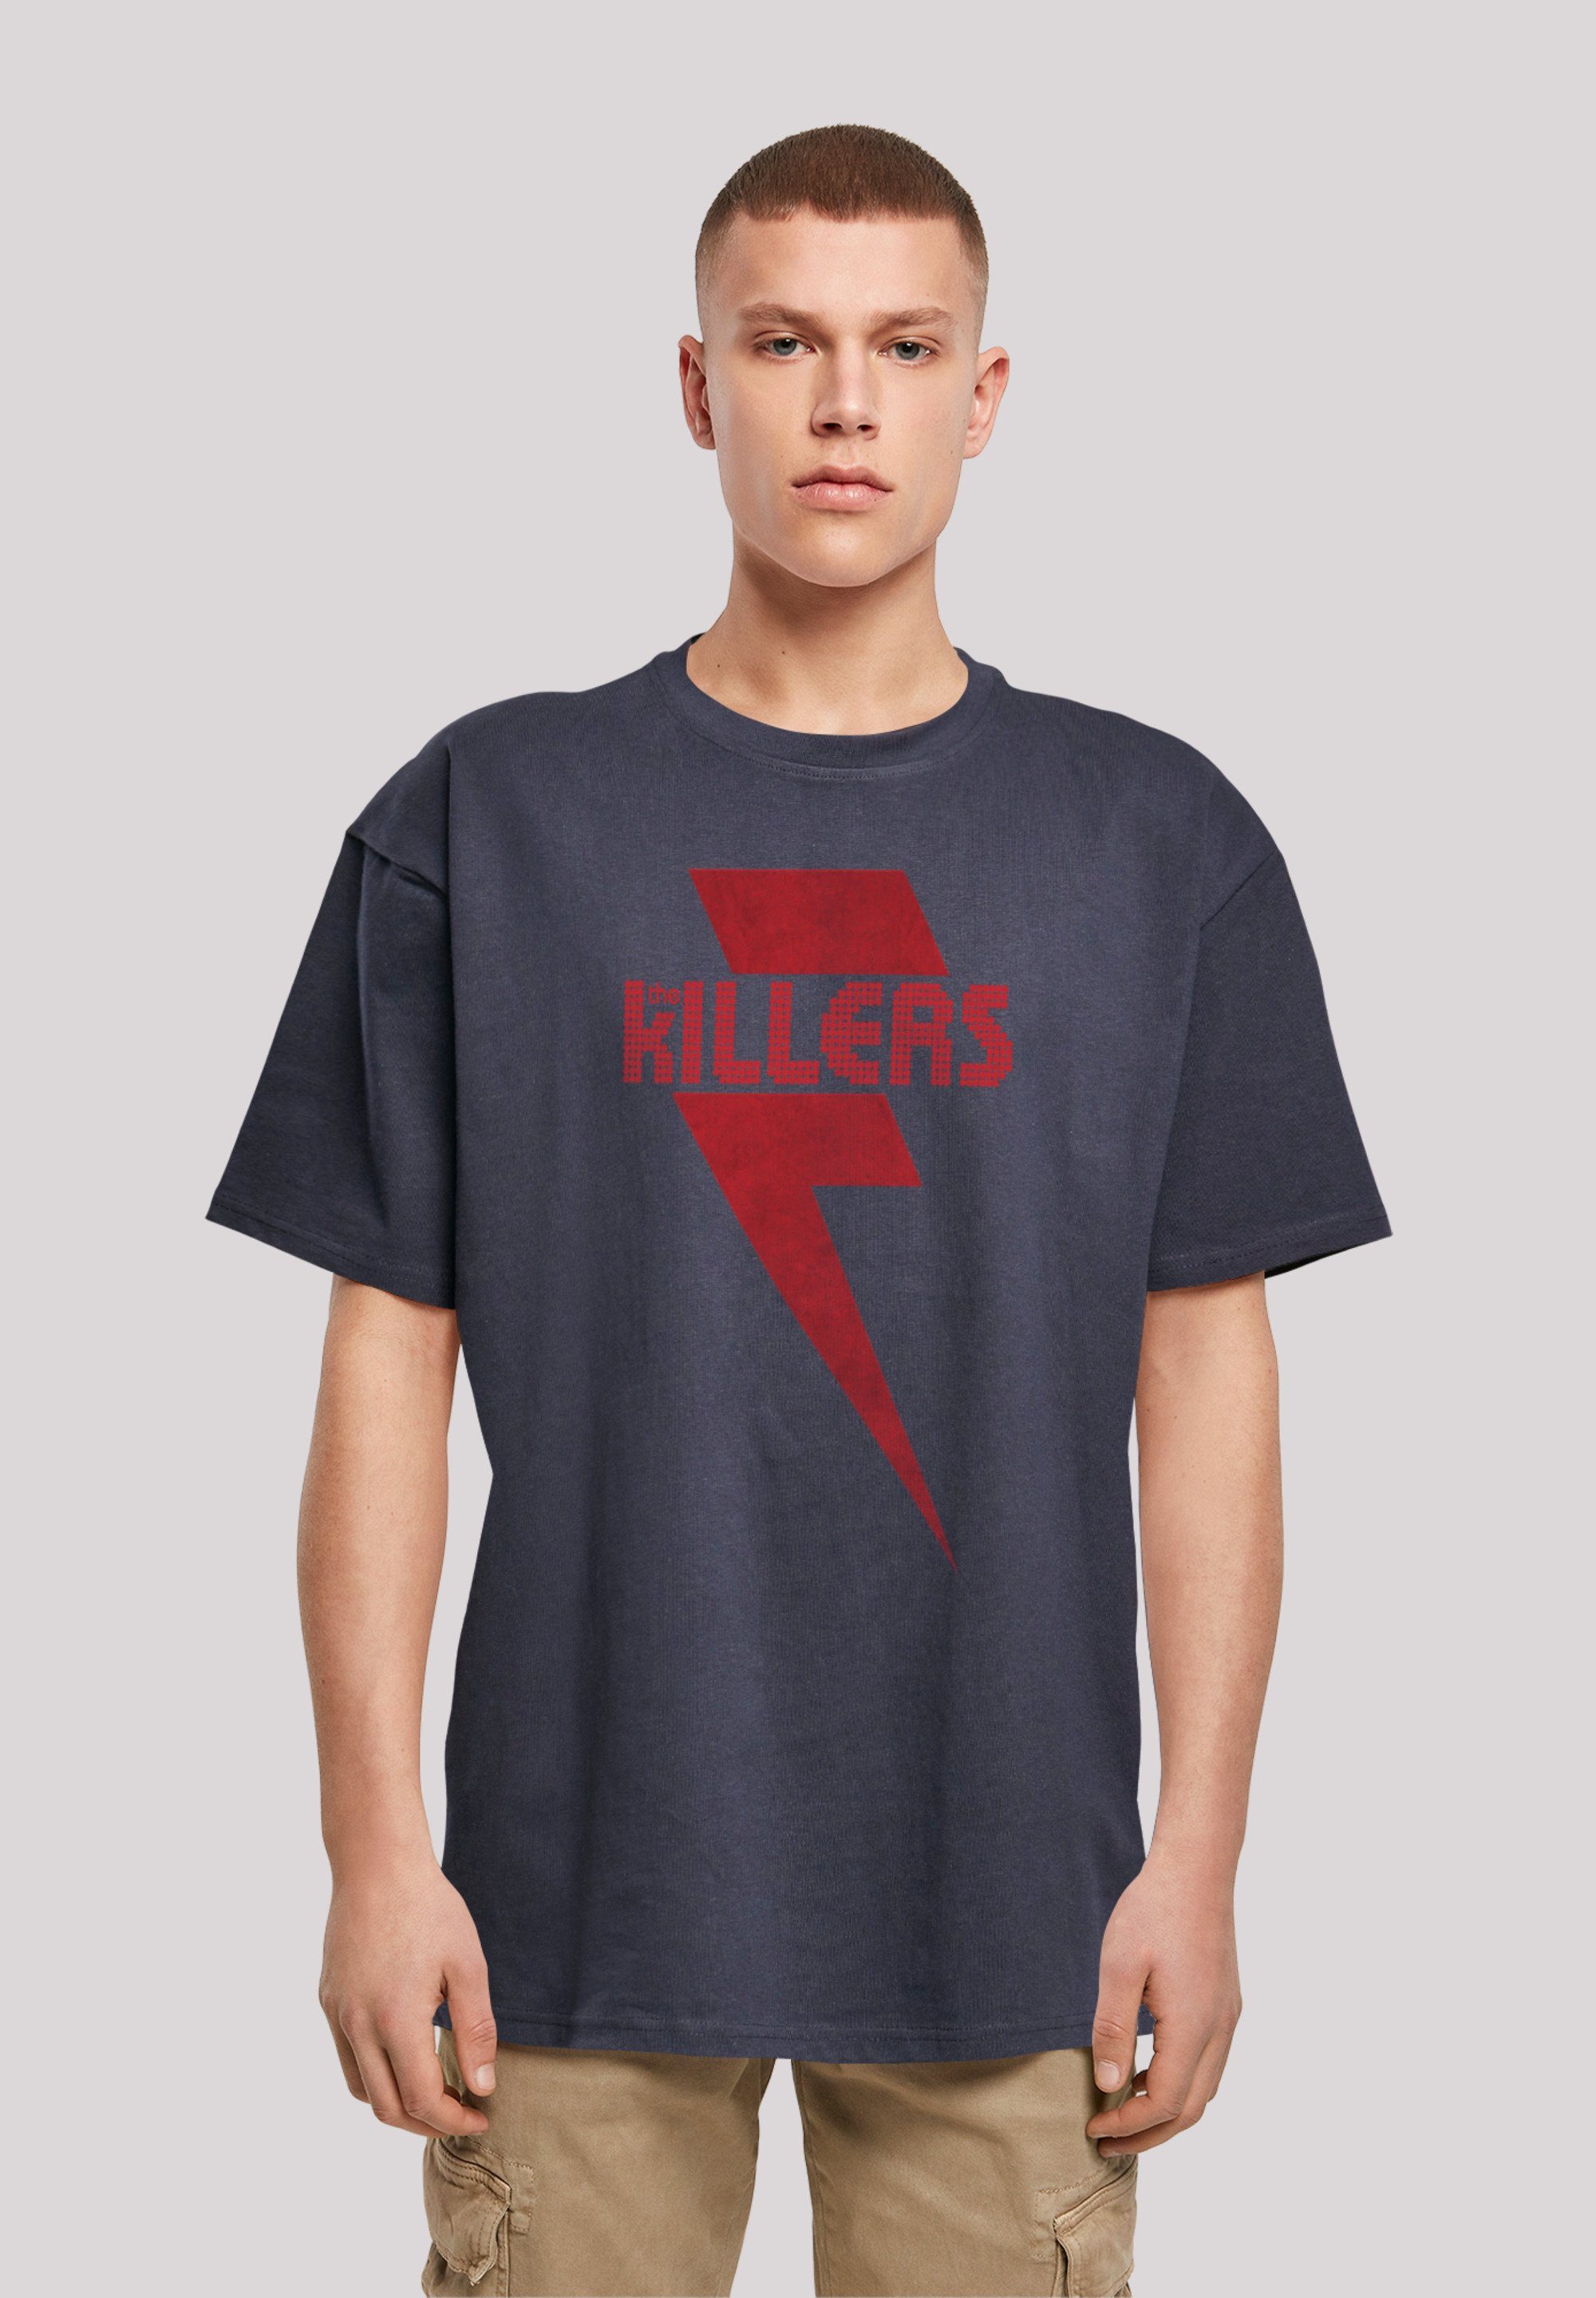 T-Shirt Print Rock navy Killers F4NT4STIC Bolt Band The Red